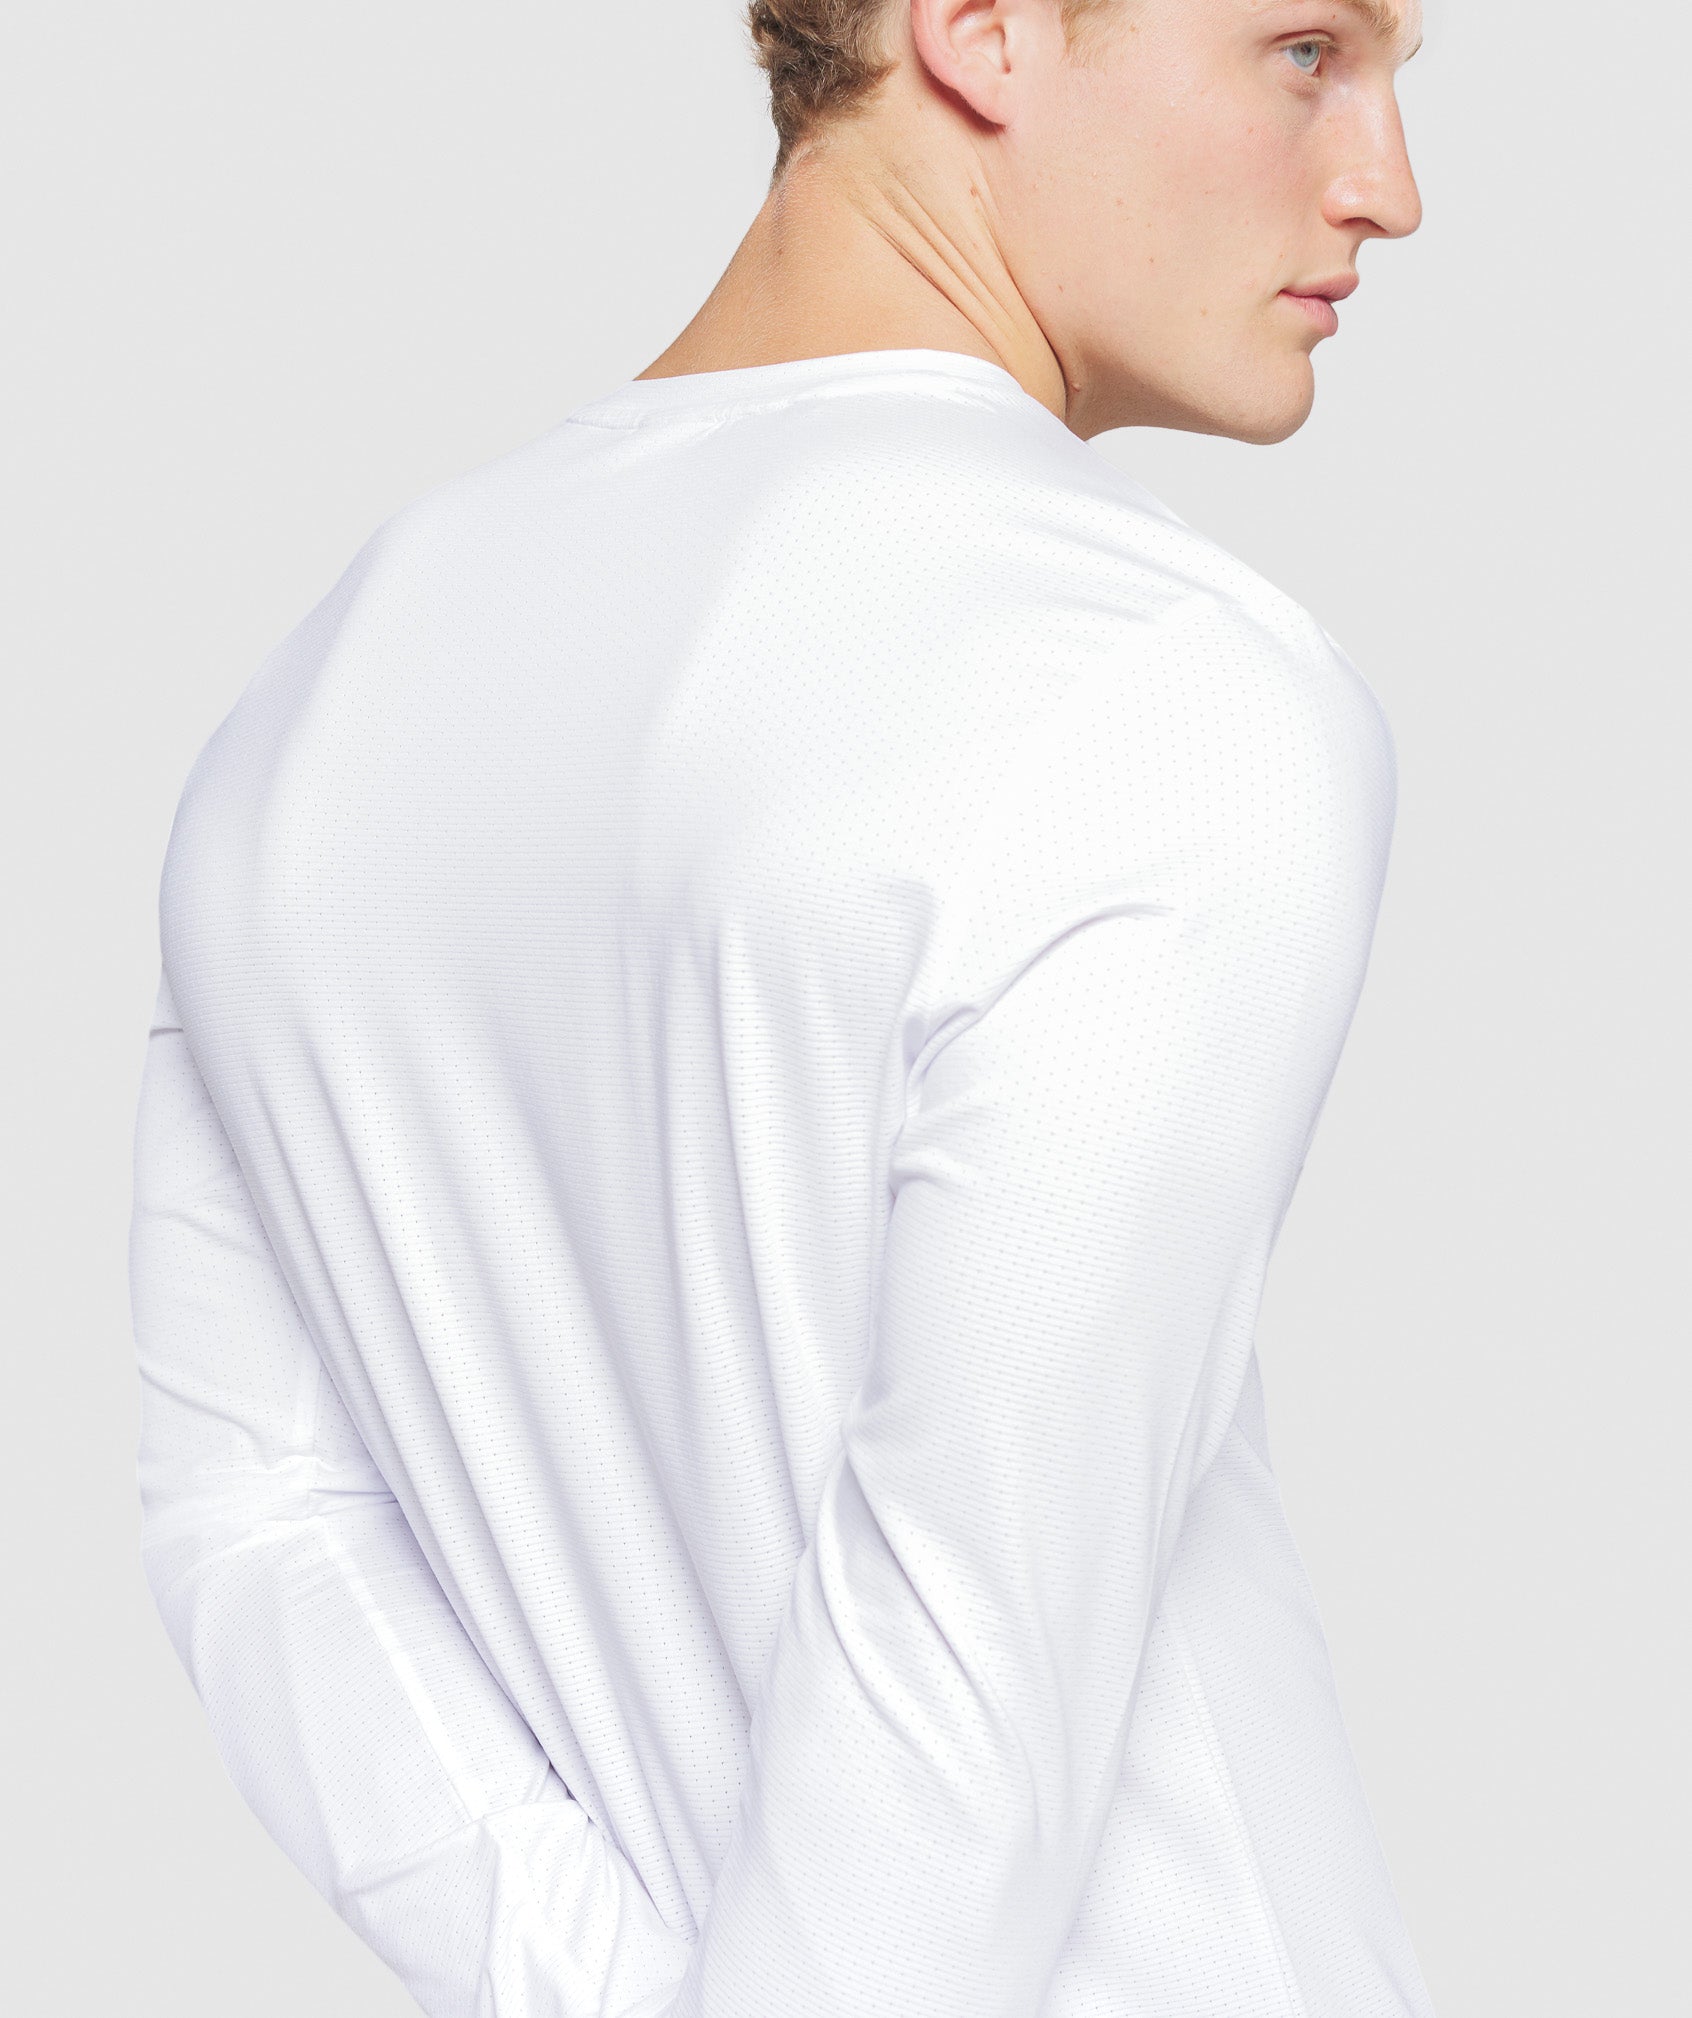 Arrival Long Sleeve T-Shirt in White